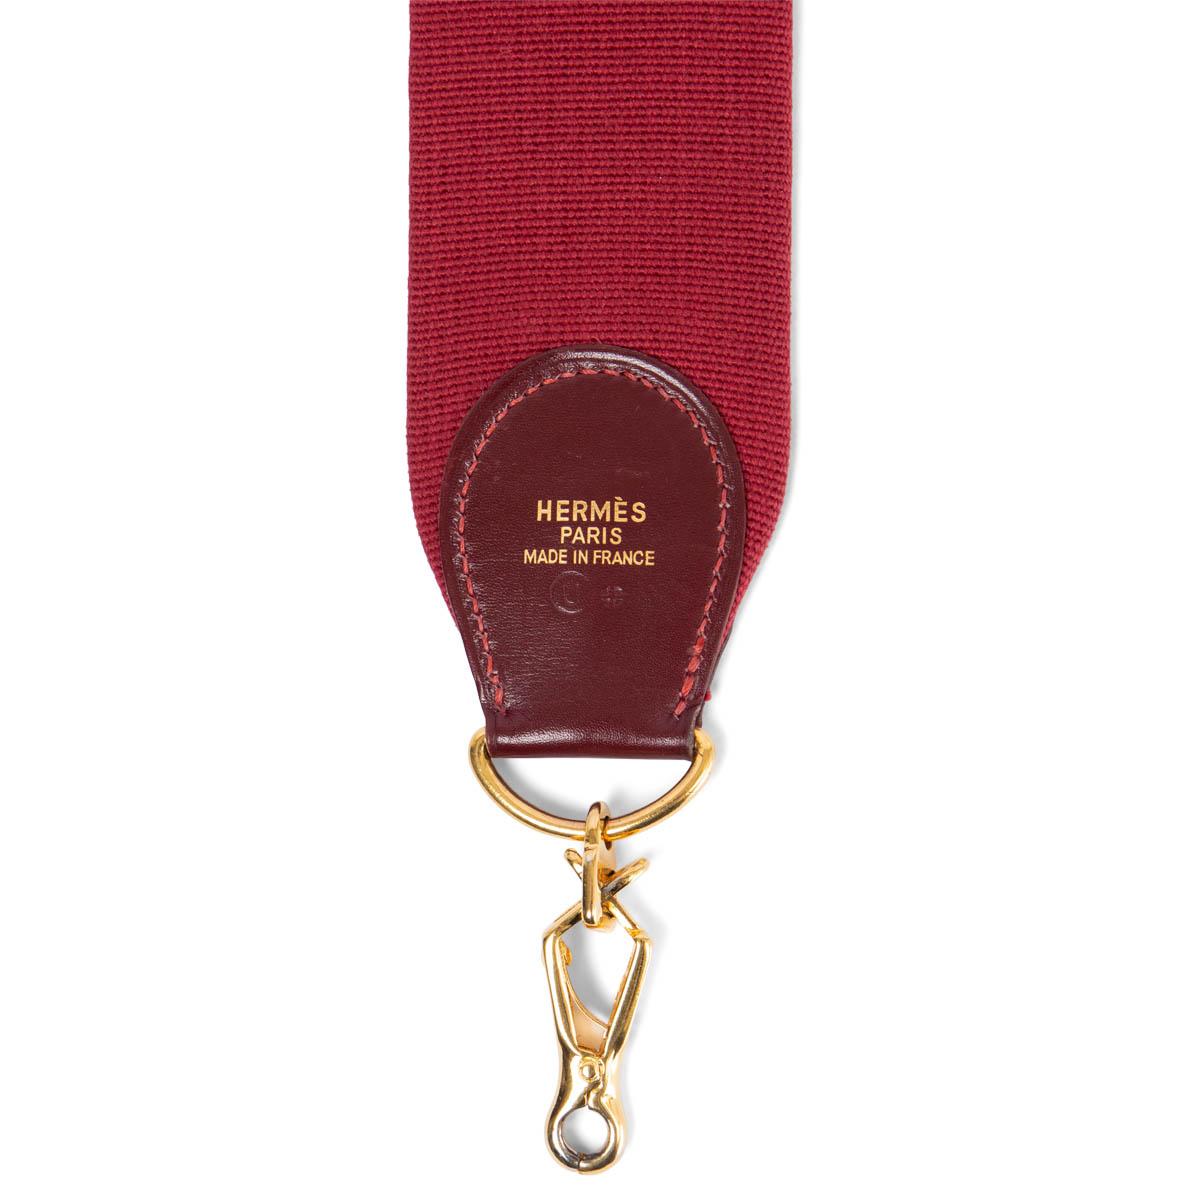 100% authentic Hermès shoulder strap for your Kelly or Evelyne bag in Rouge H canvas and Box leather. Has been carried and is in excellent condition.

Measurements
Width	5cm (2in)
Length	110cm (42.9in)
Hardware	Gold-Tone

All our listings include